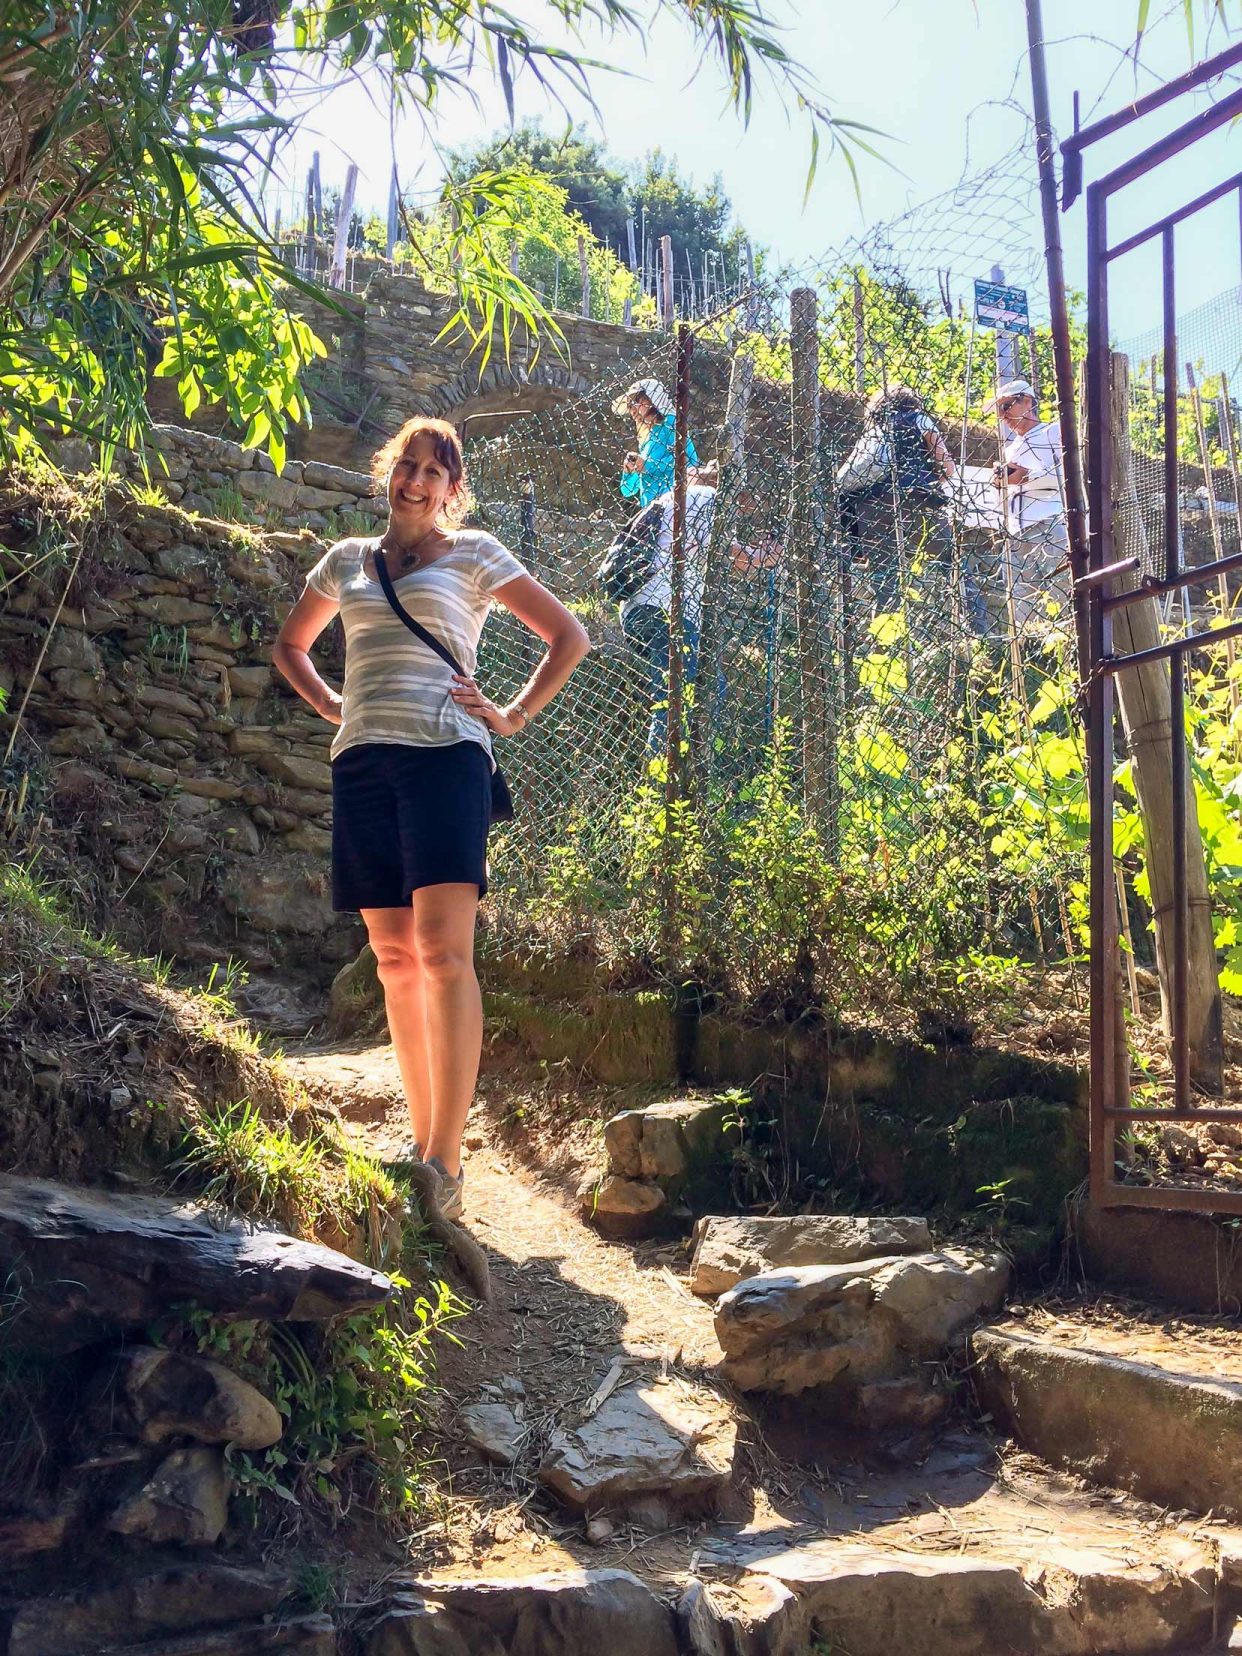 Shelley on the well trodden trails of cinque terre